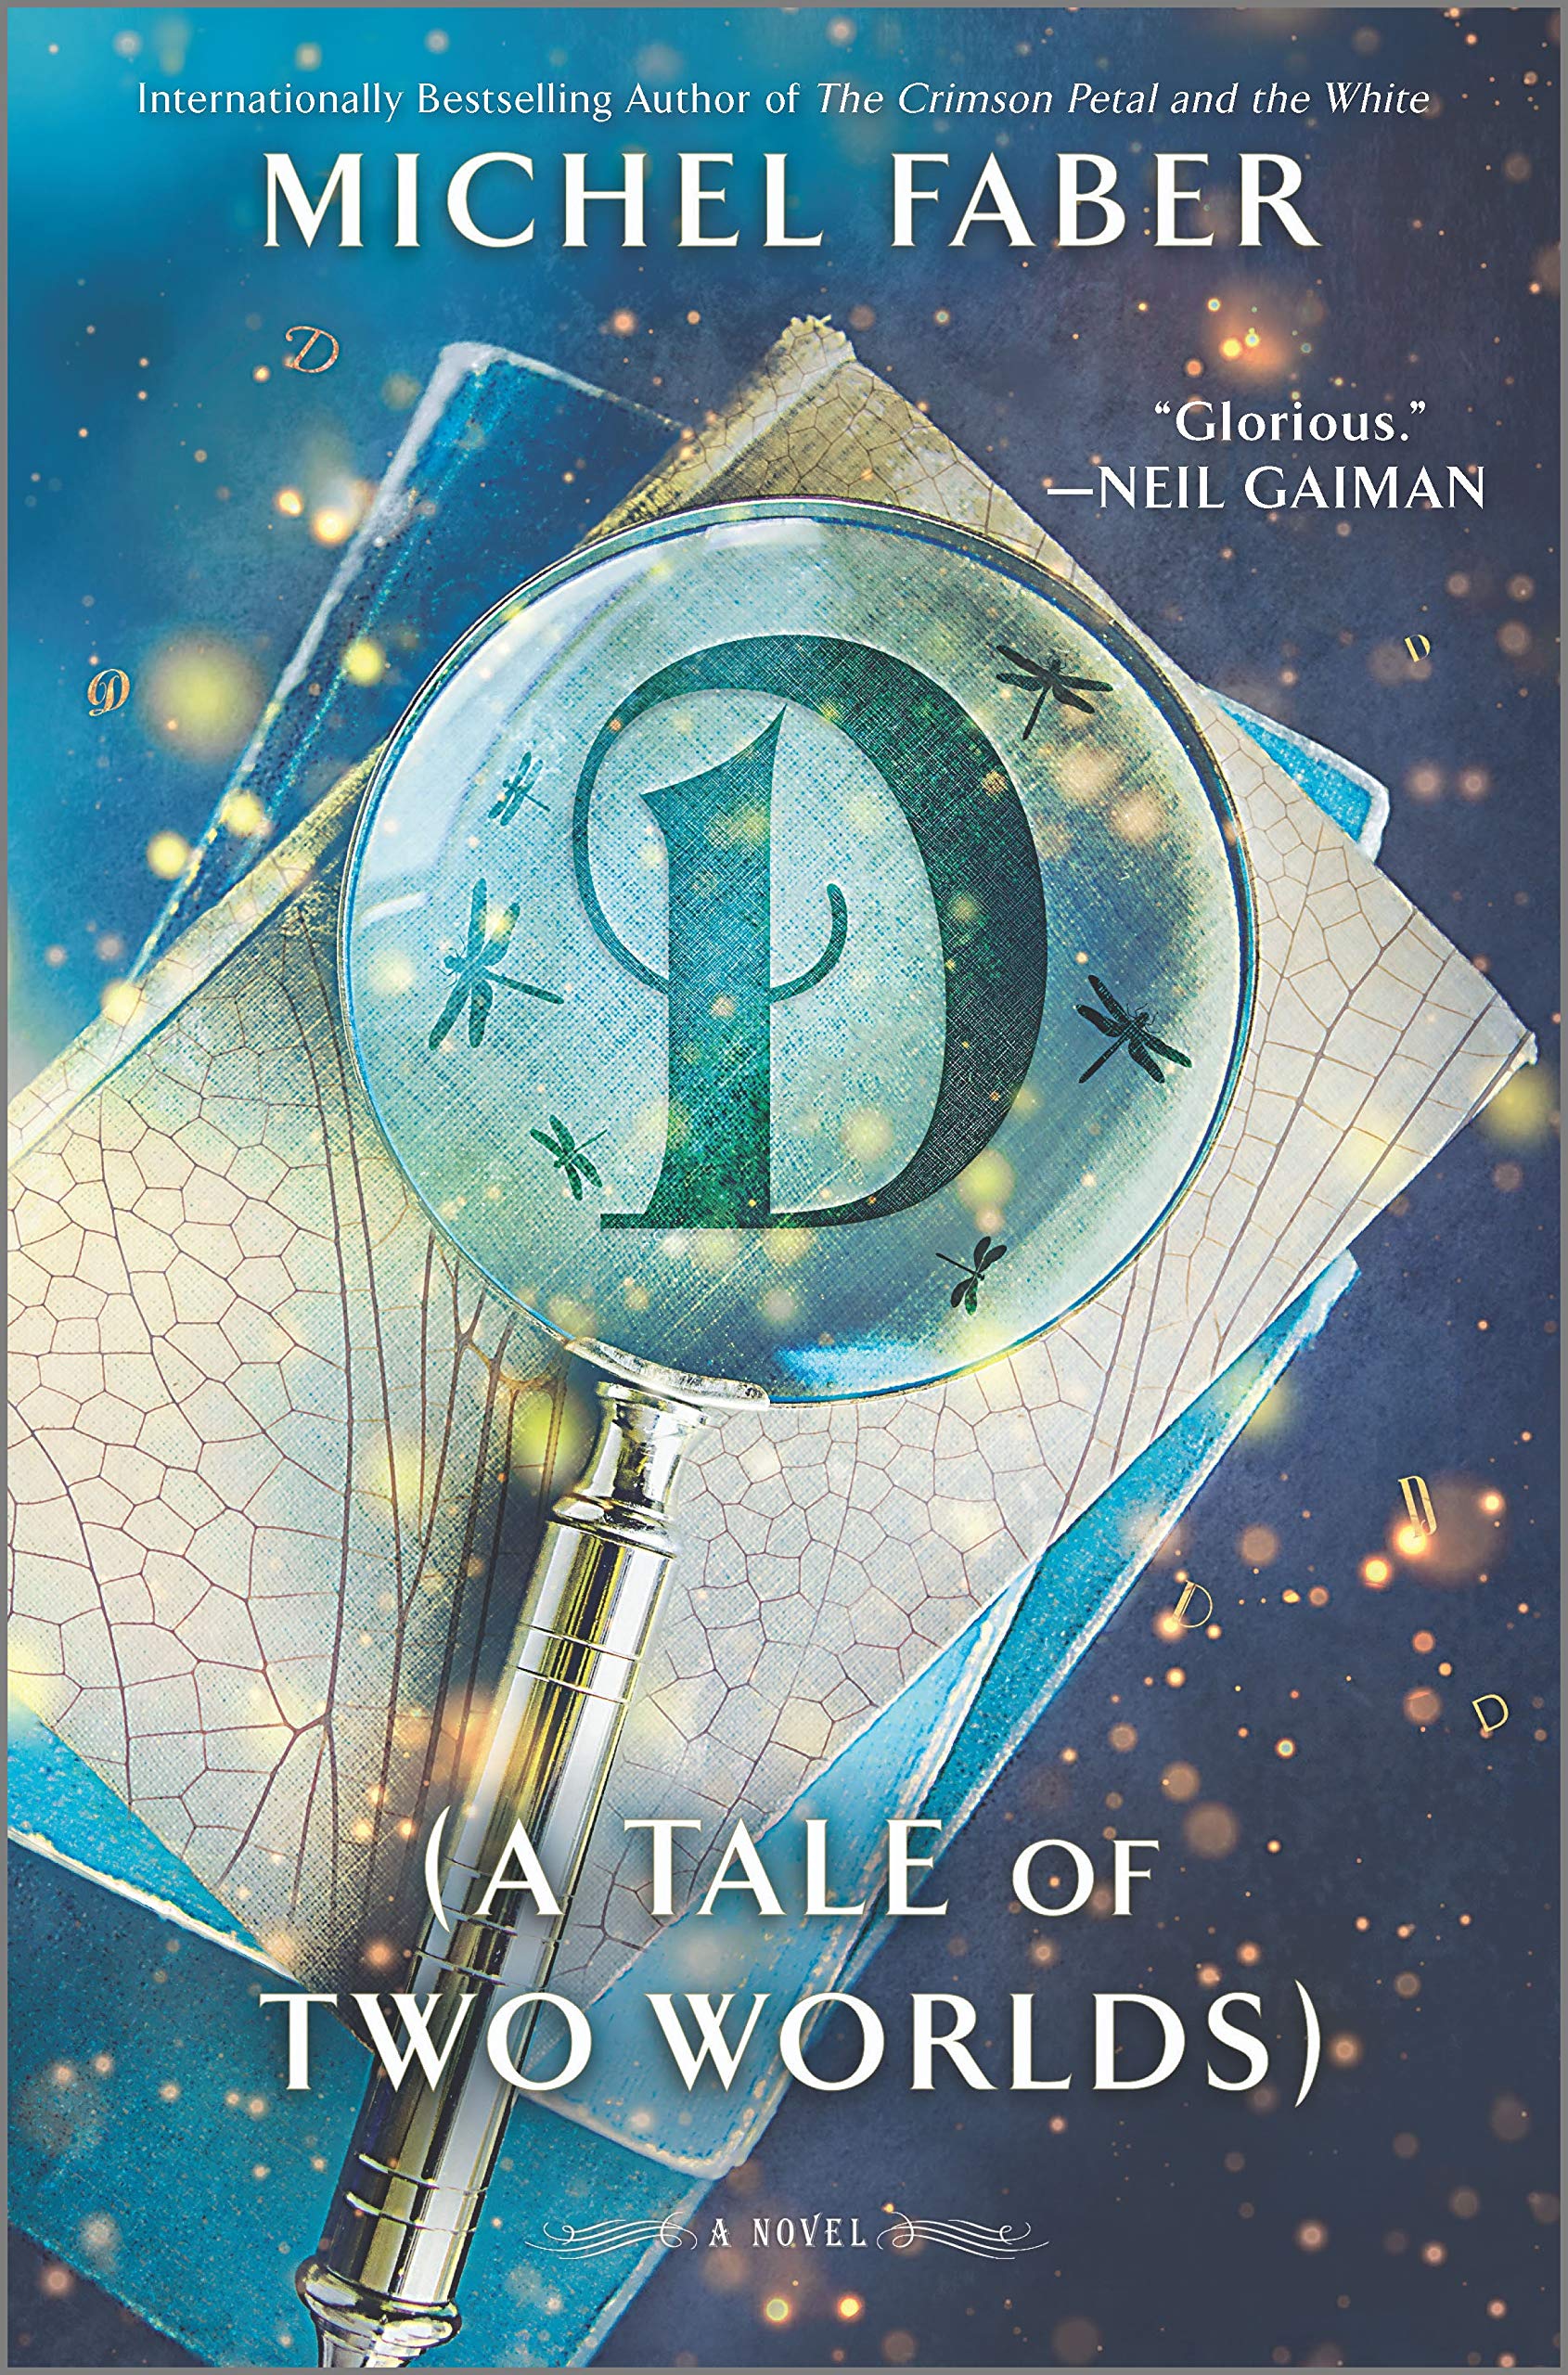 Image for "D (A Tale of Two Worlds)"